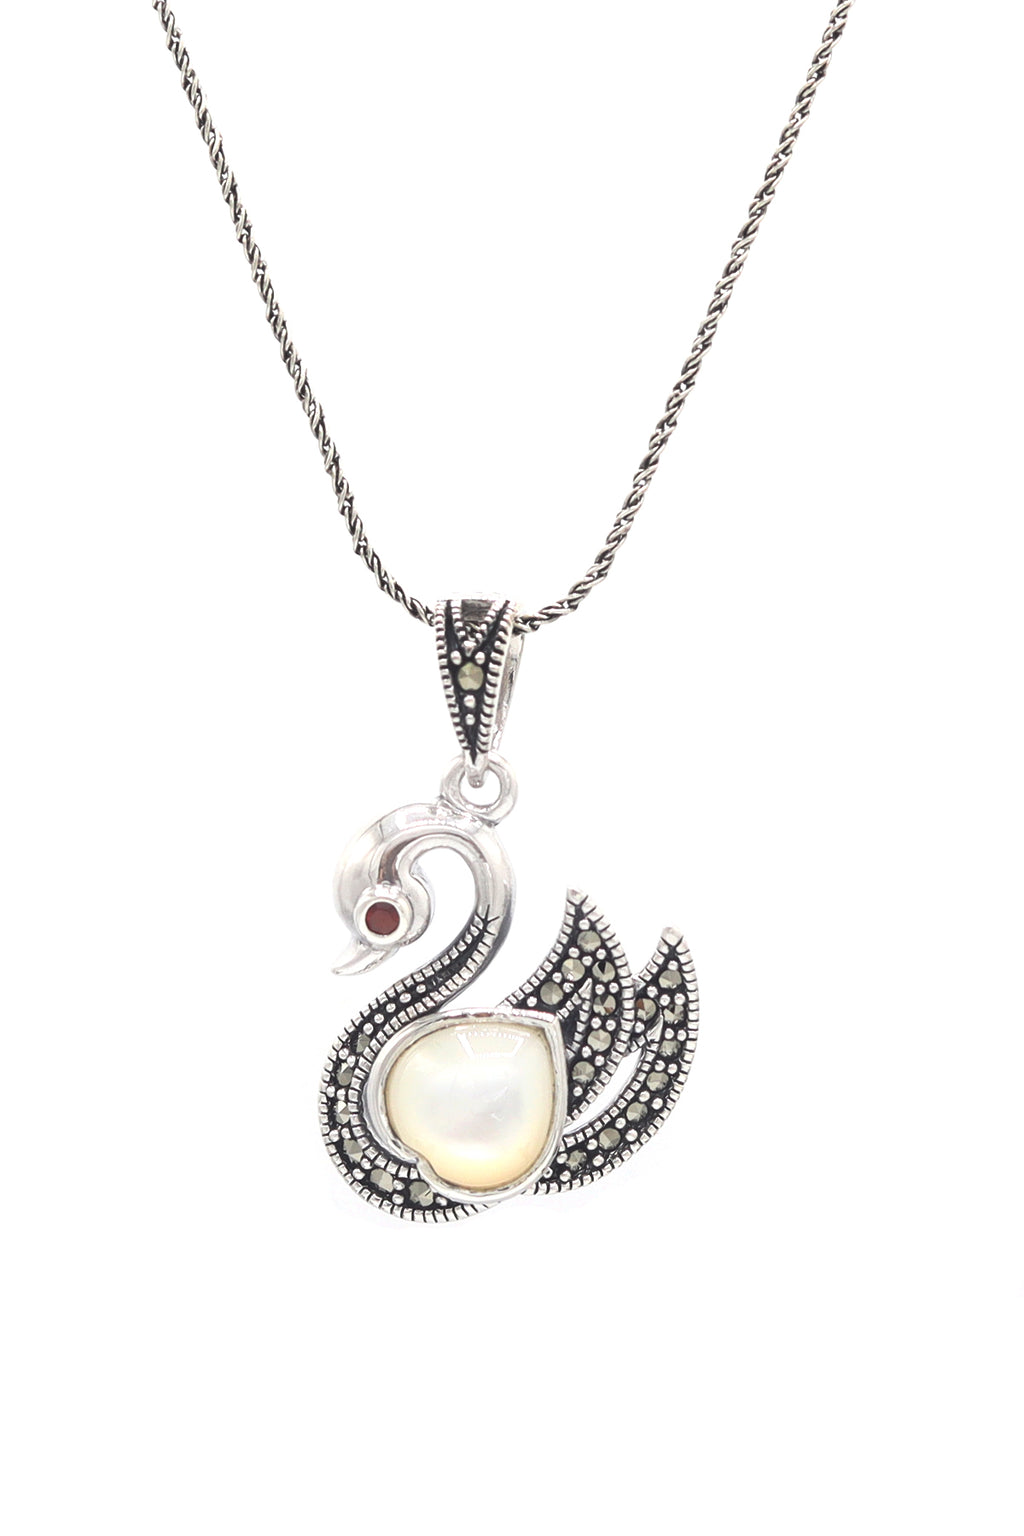 Swan Model Handmade Silver Necklace With Mother of Pearl (NG201021603)